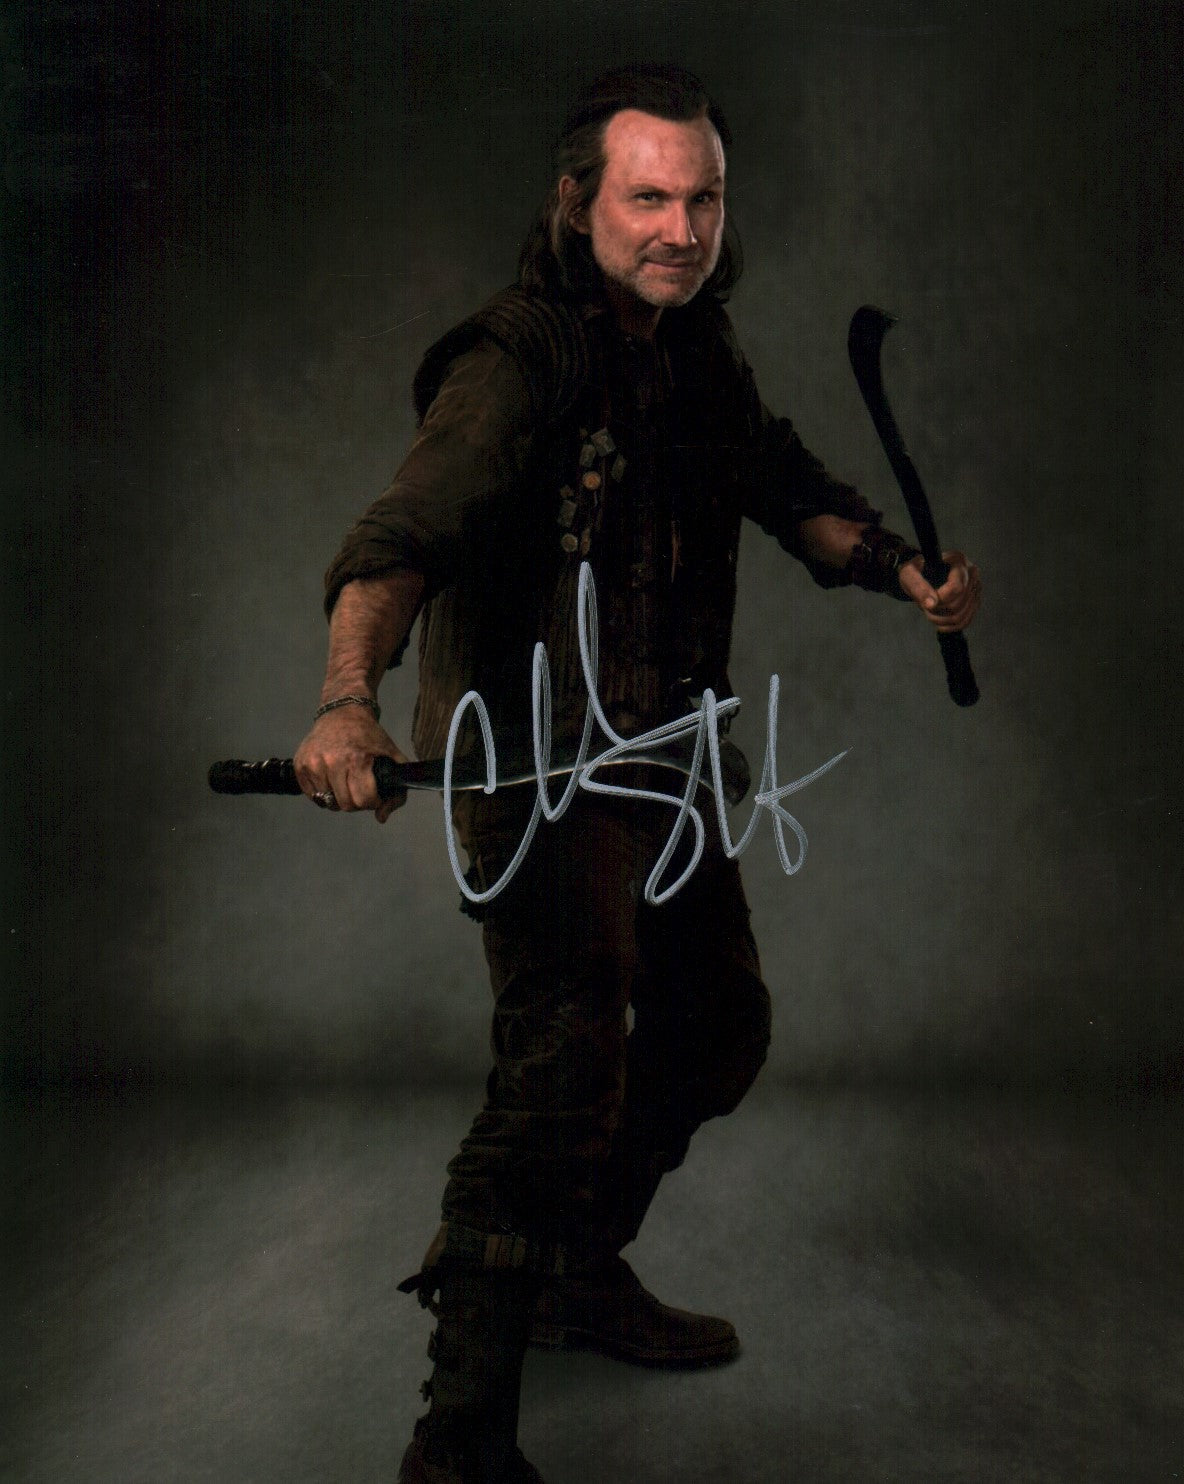 Christian Slater Willow 8x10 Signed Photo JSA Certified Autograph